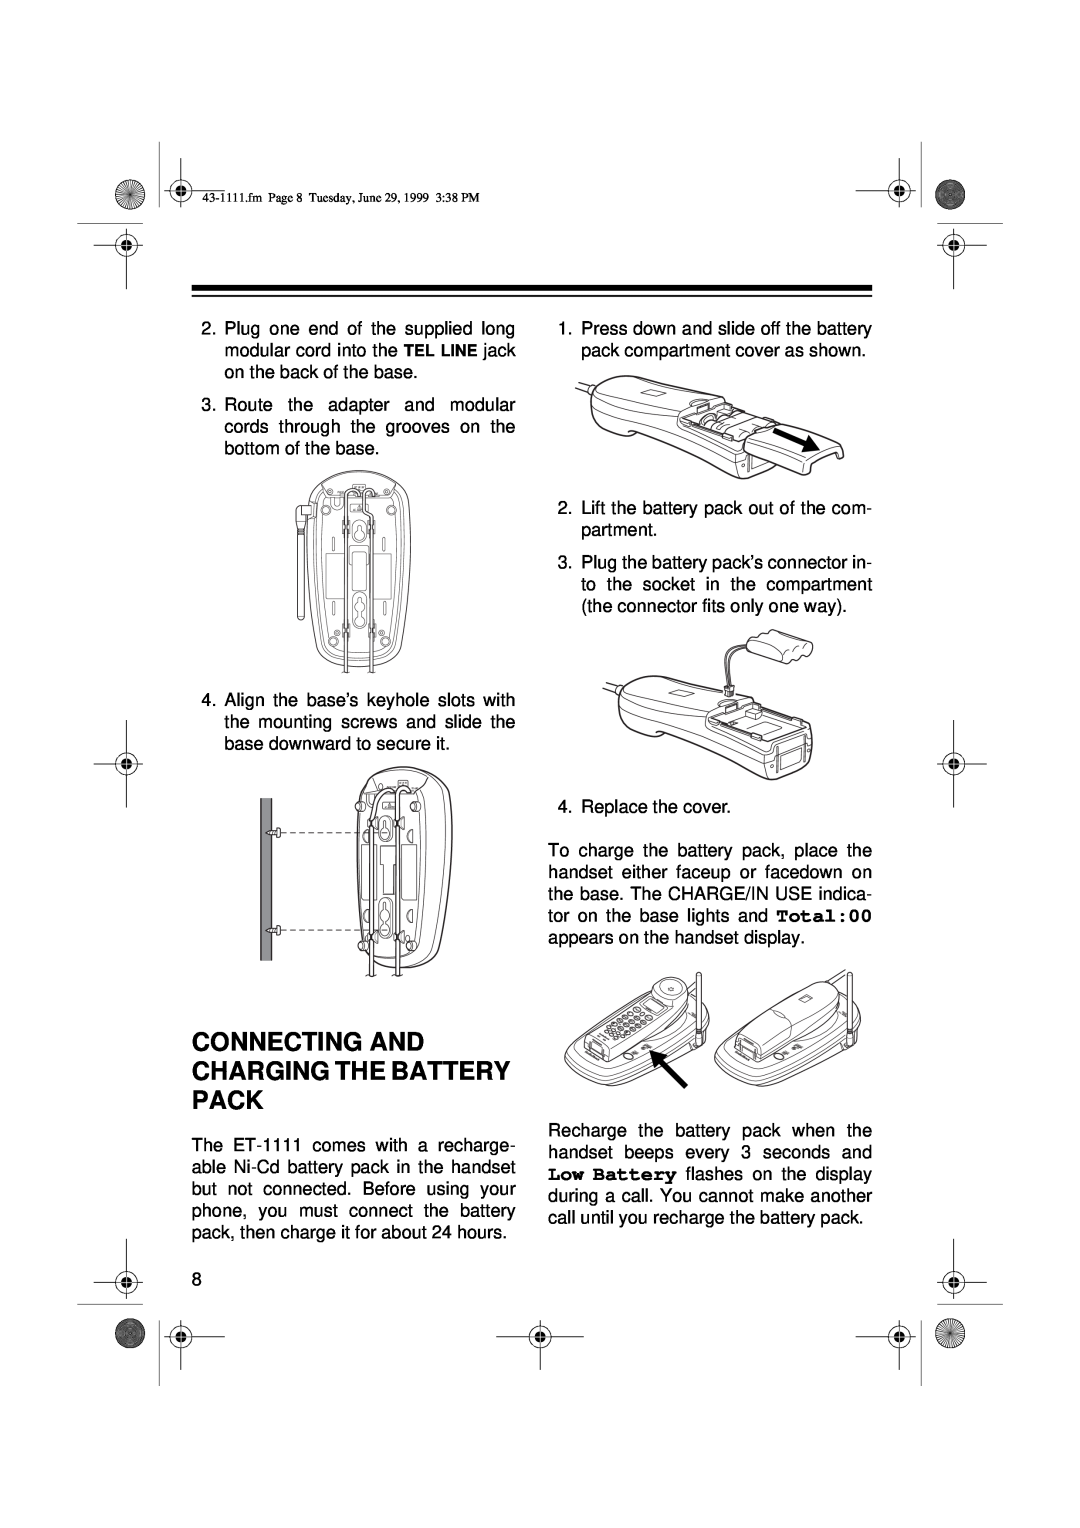 Radio Shack ET-1111 owner manual Connecting And Charging The Battery Pack, fm Page 8 Tuesday, June 29, 1999 338 PM 